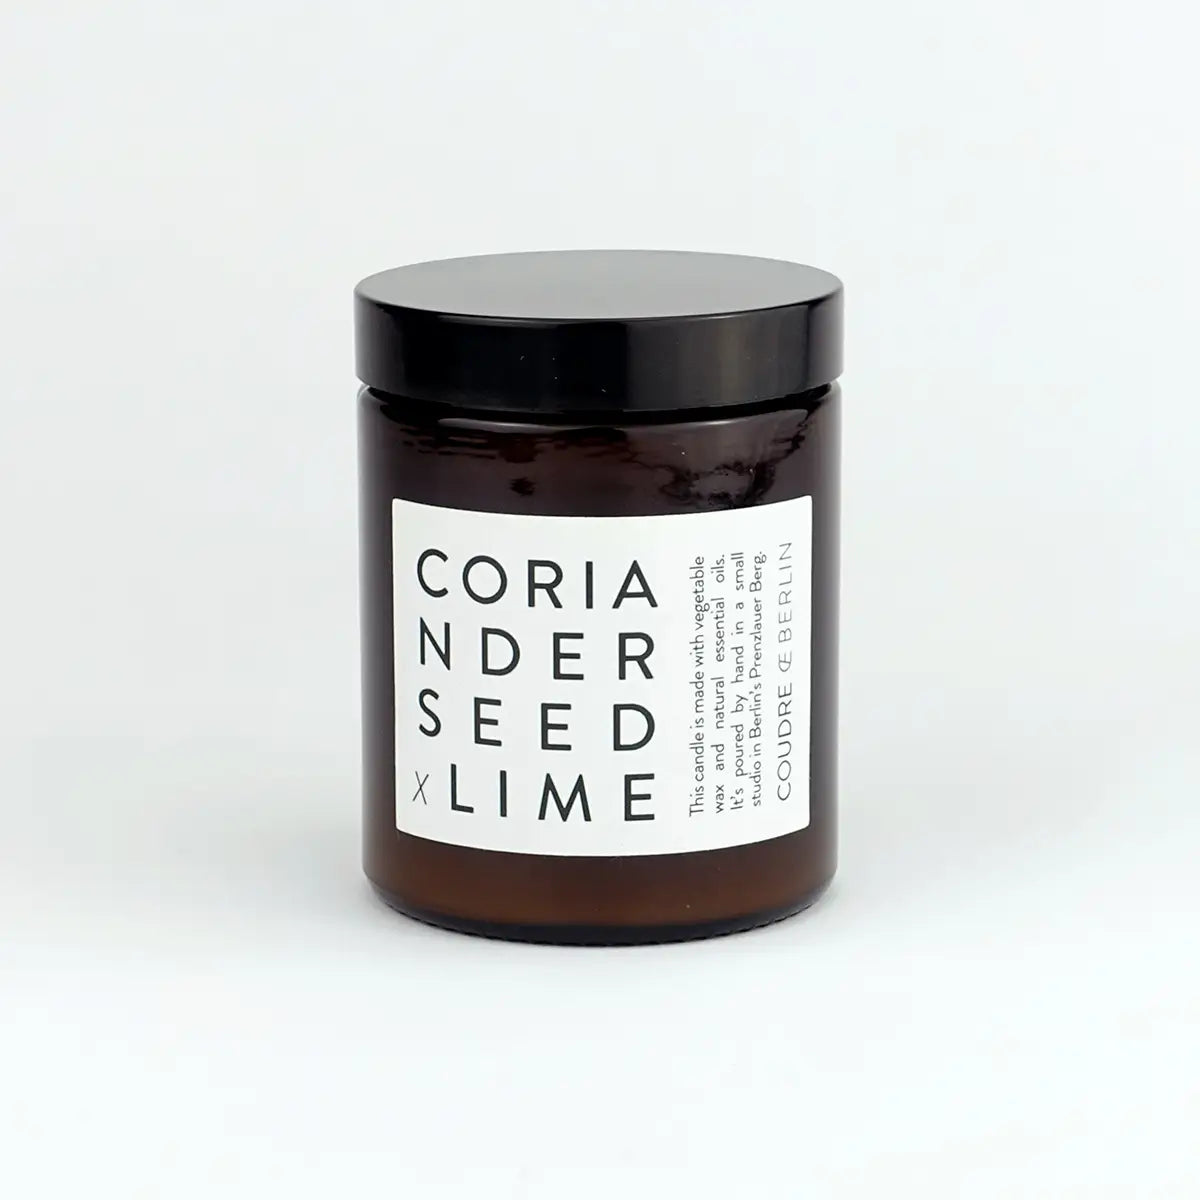 Corianderseed X Lime - Essentials Scented Candle